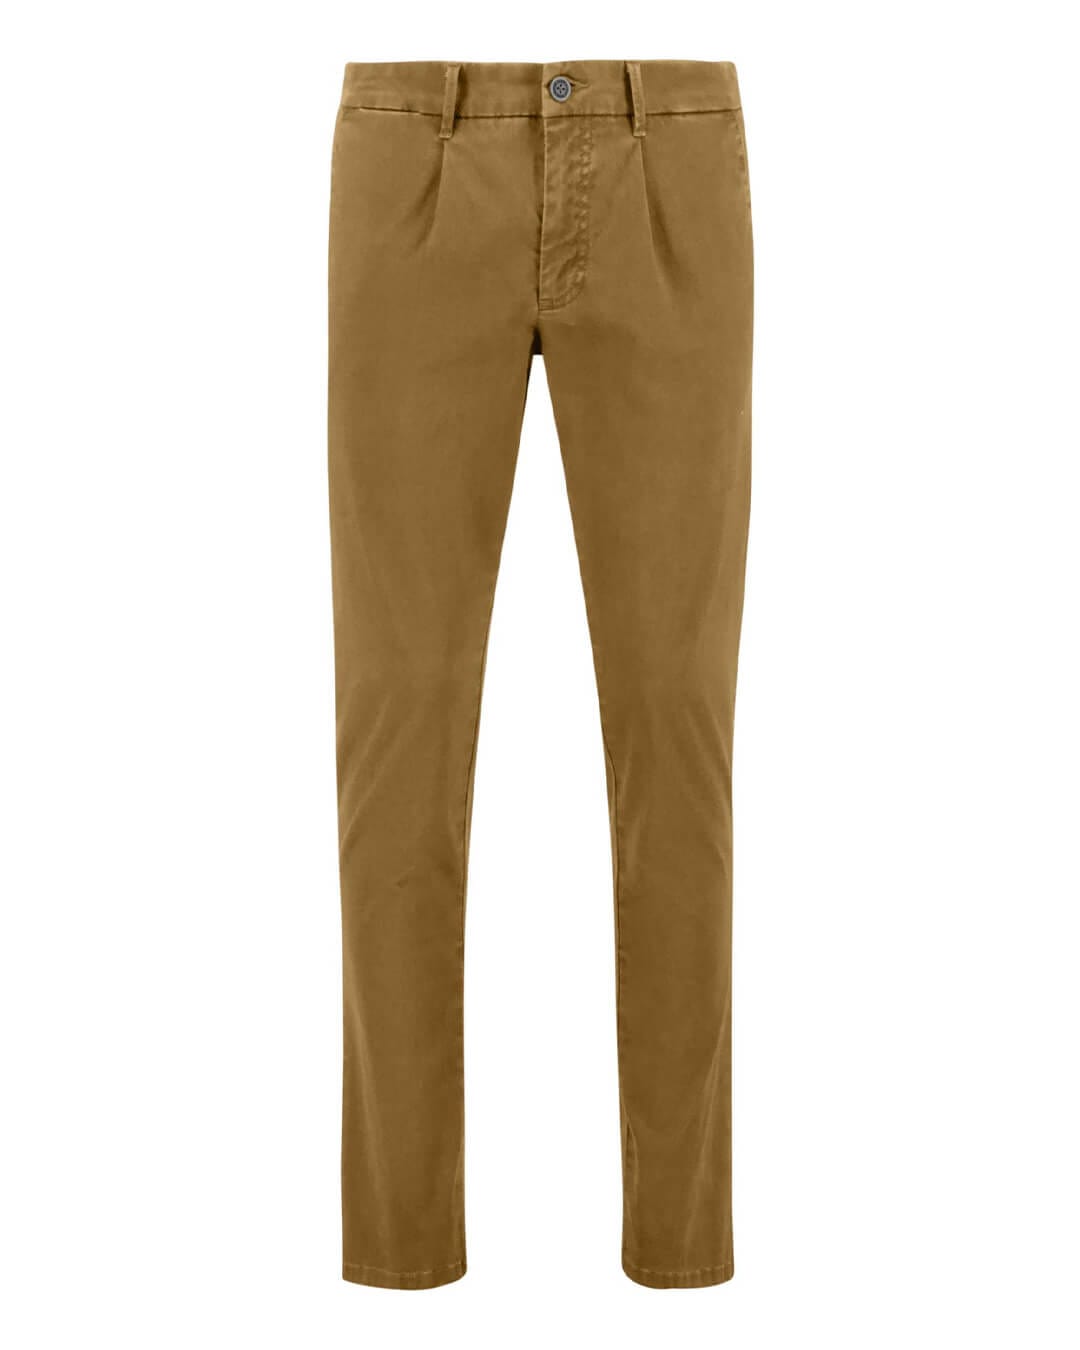 Fynch-Hatton Trousers Fynch-Hatton Camel Printed Structure Chino Trousers